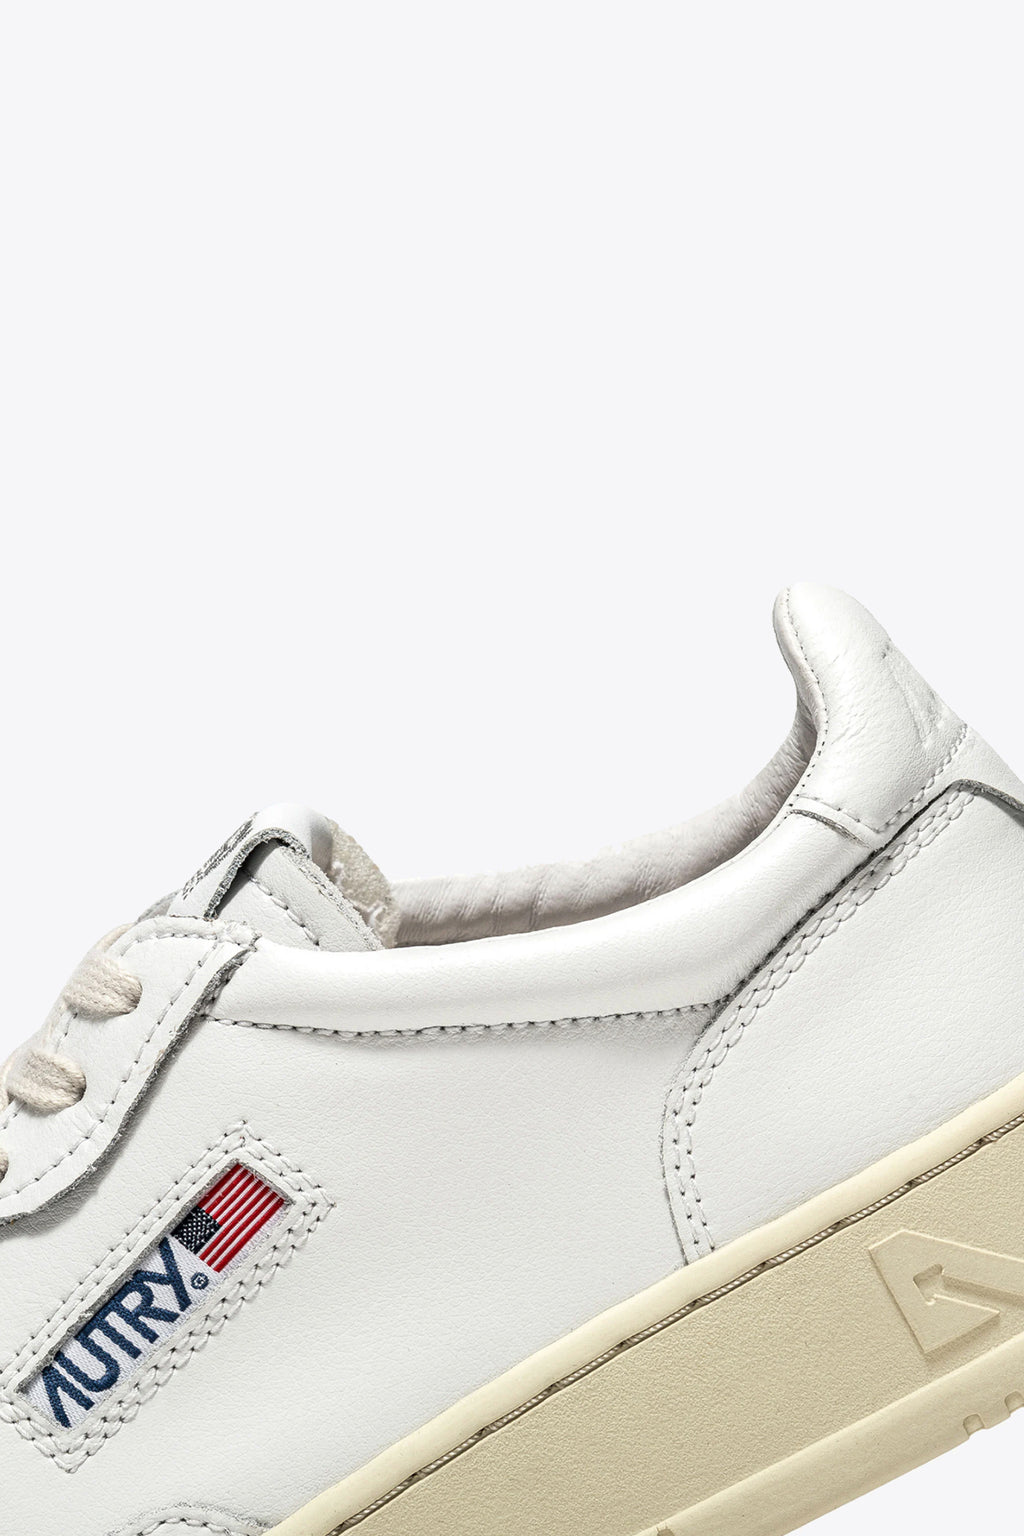 alt-image__White-leather-lace-up-low-sneaker-with-logo---Medalist